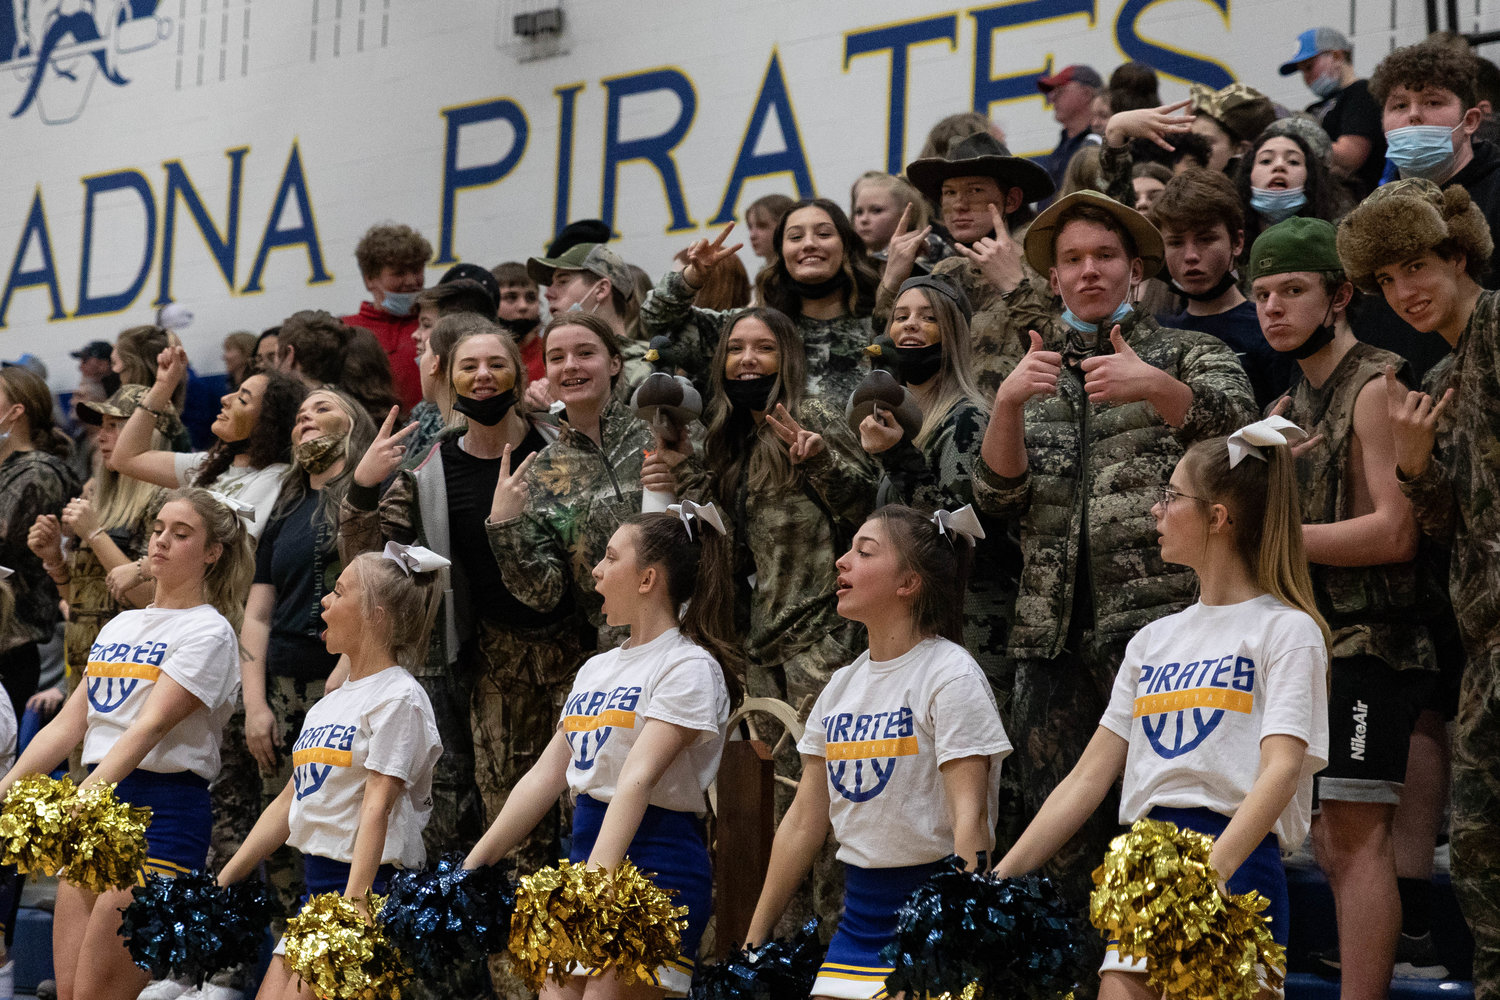 The Adna student section poses for a photo at a boys basketball game against Morton-White Pass Jan. 28.